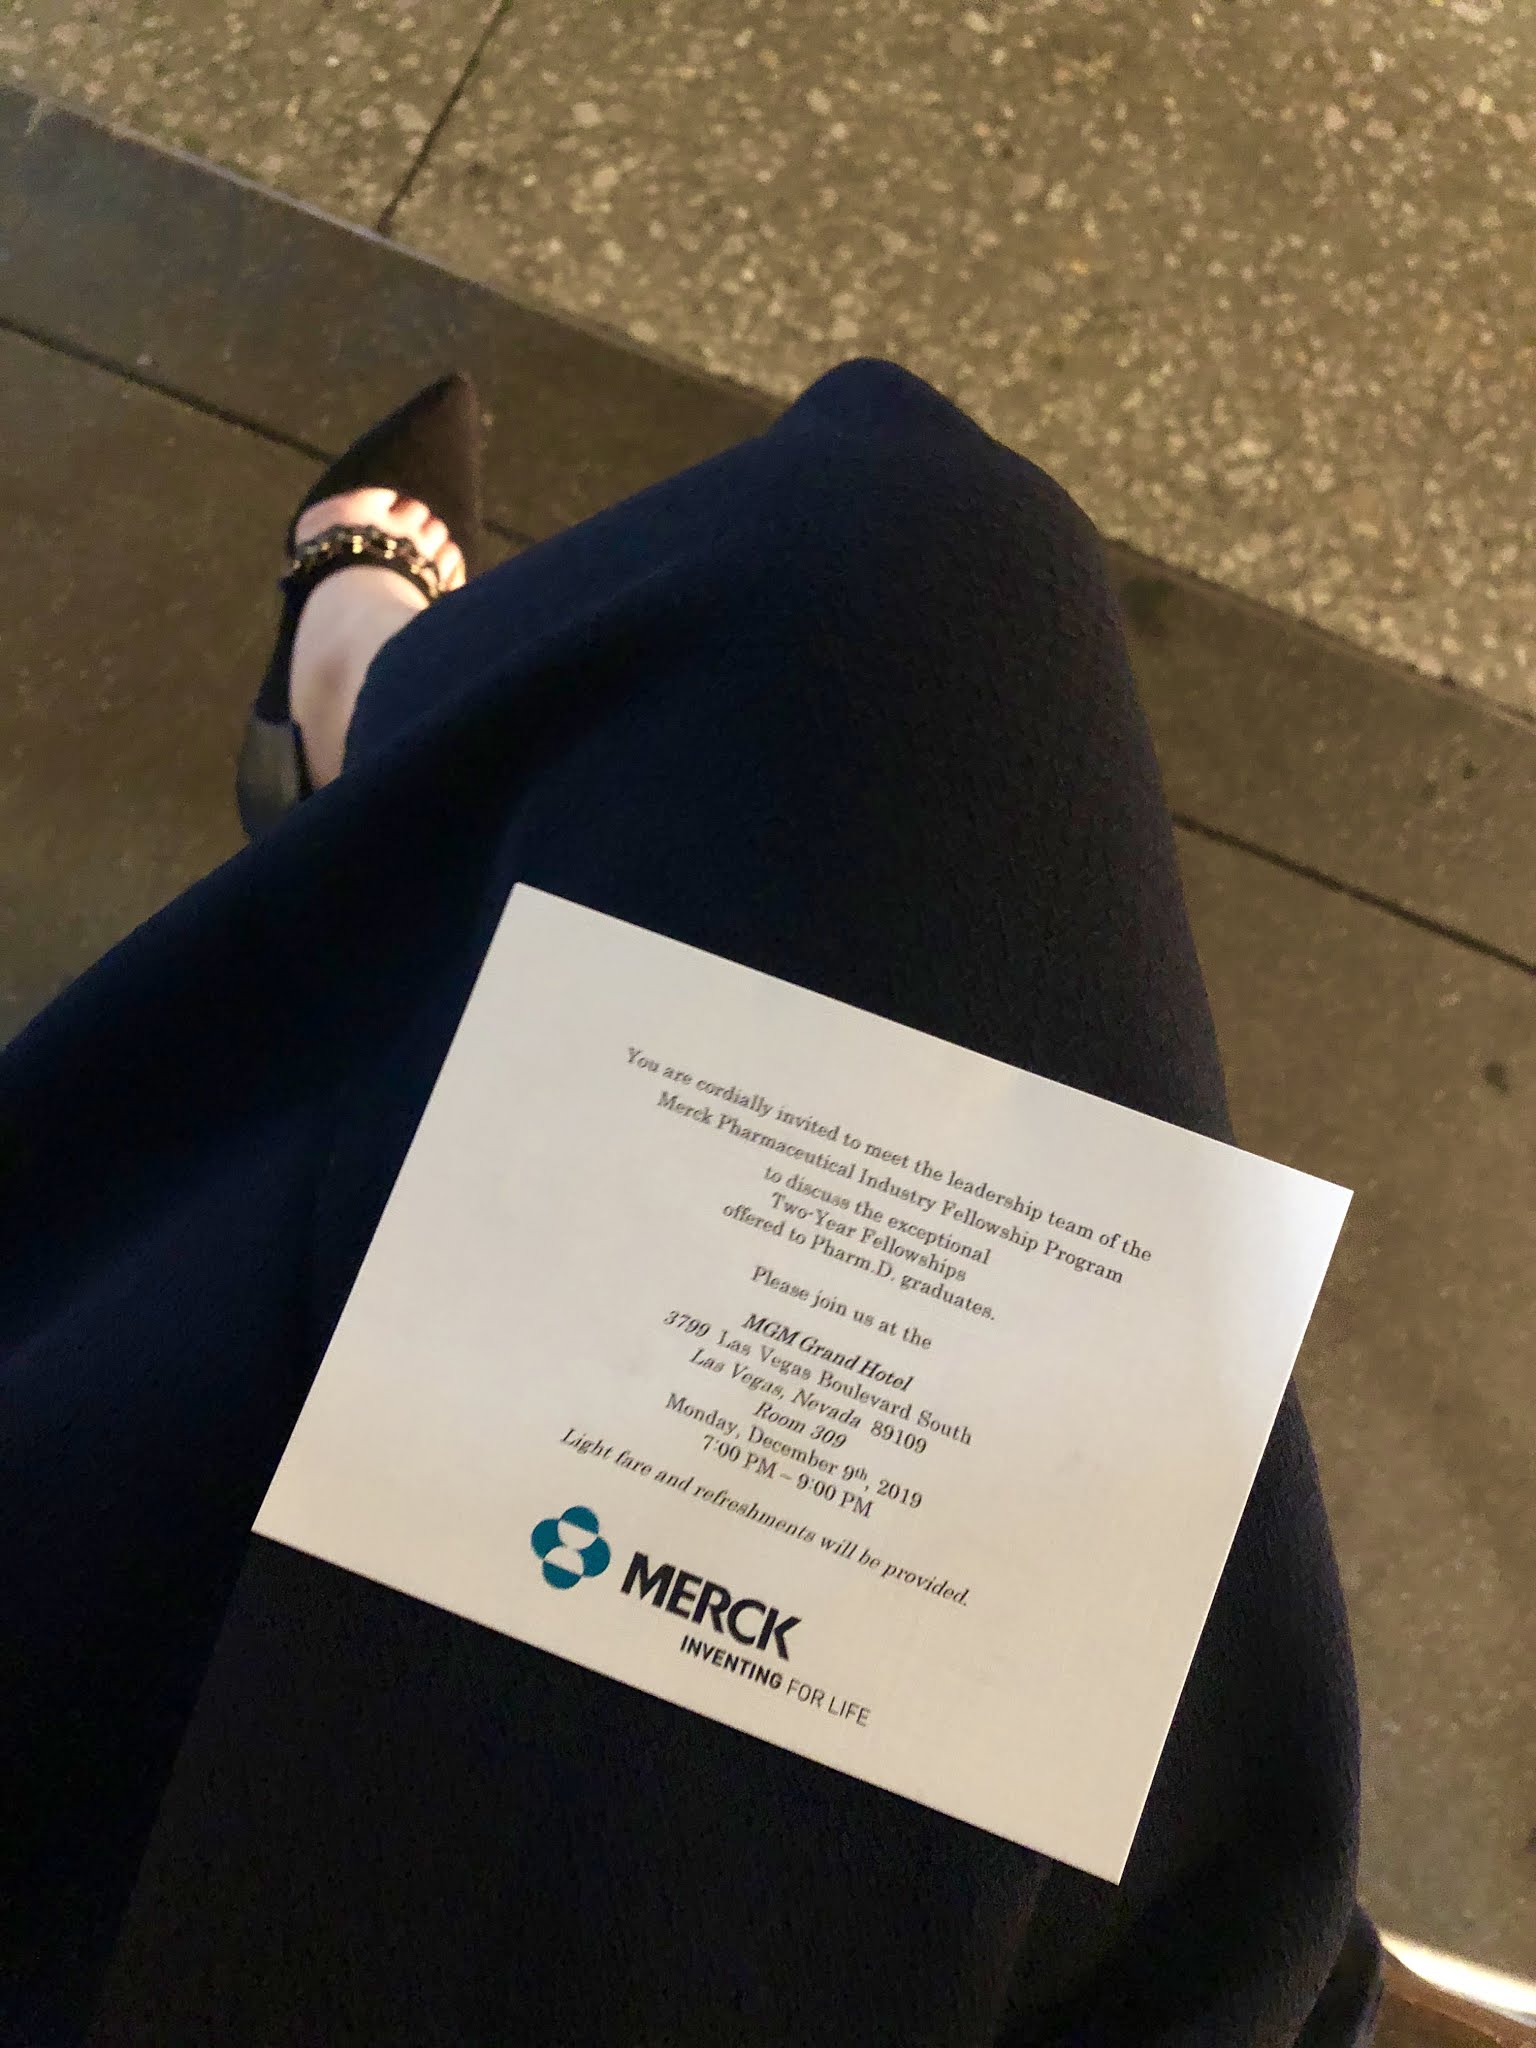 Adrienne Nguyen, PharmD - PharmD Fellowship Reception Invitation to Merck in Collaboration with Rutgers University at the MGM Grand in Las Vegas, Nevada